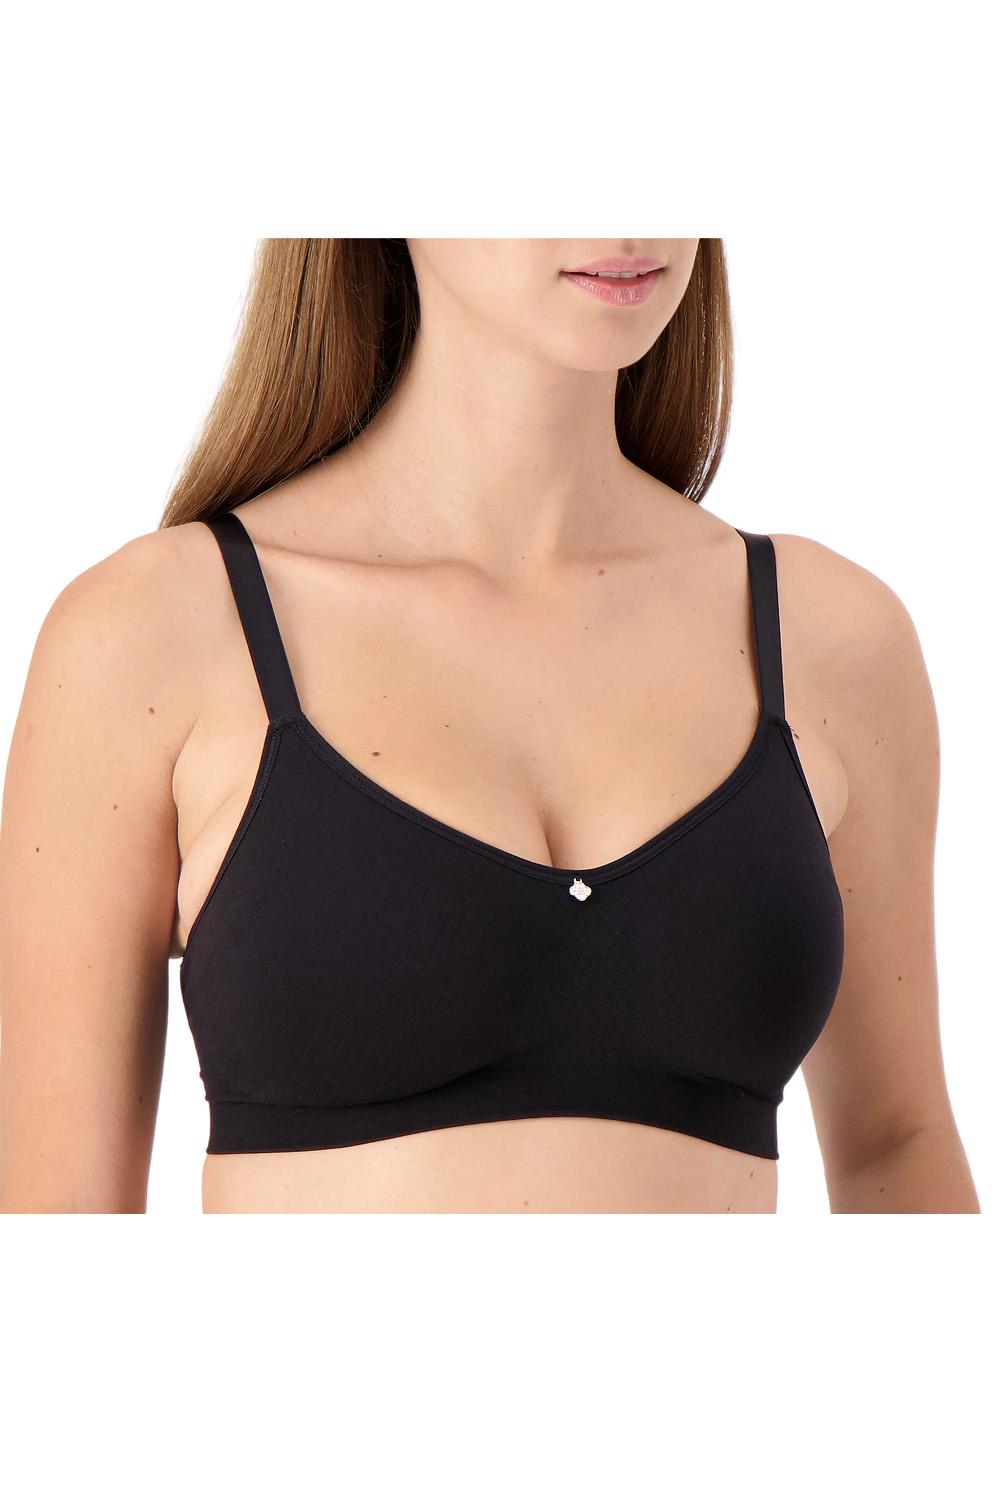 Breezies Air Effects Breathable Wirefree Support Bra 